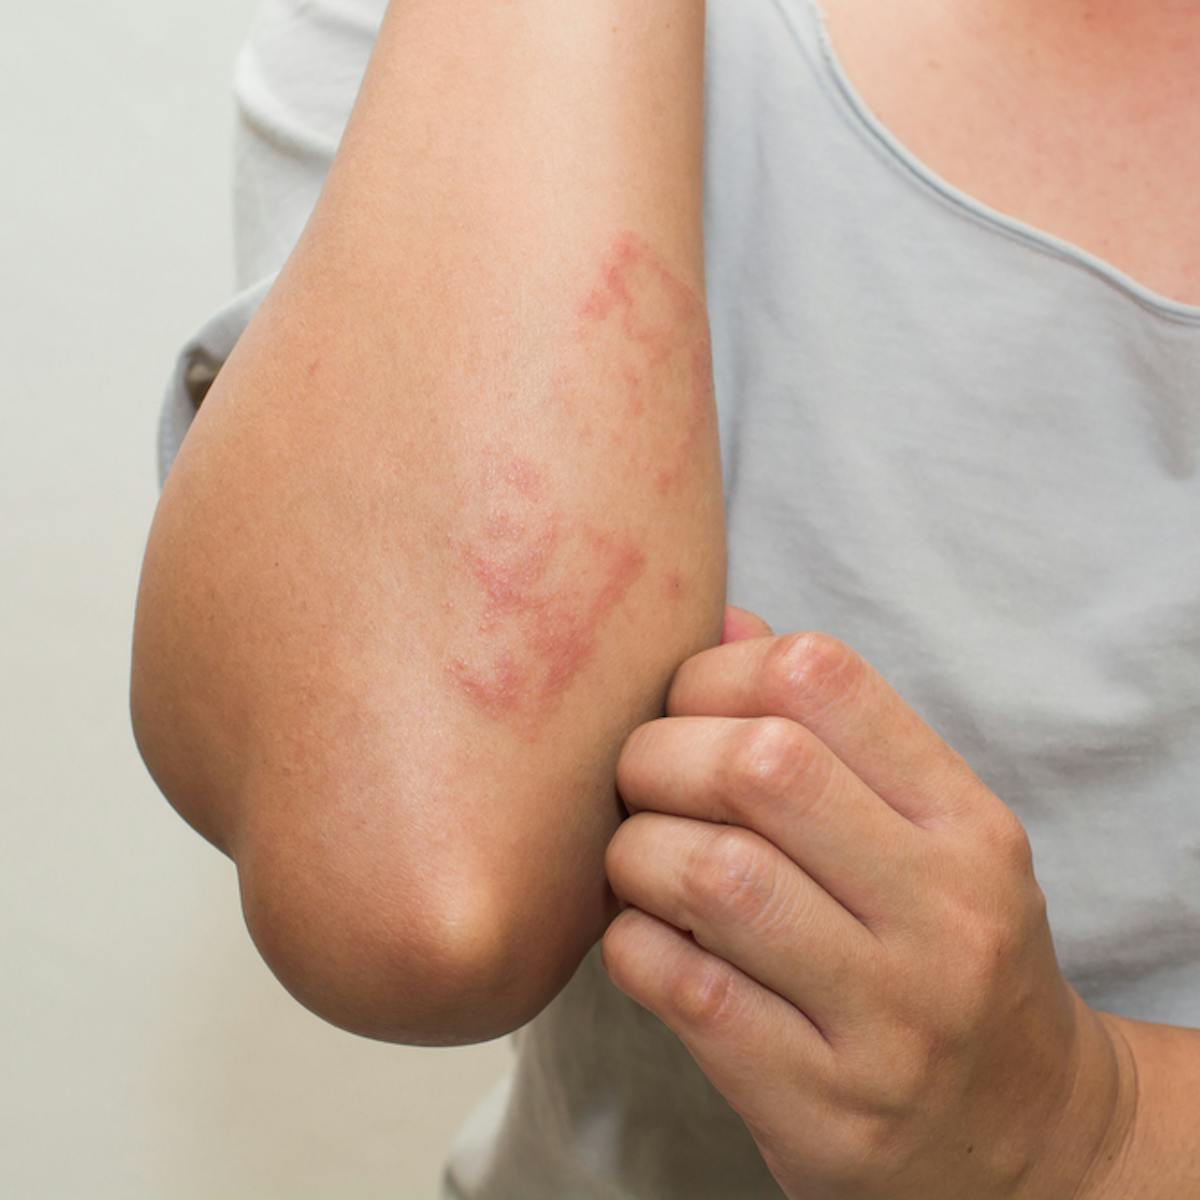 skin rashes and what to do about them